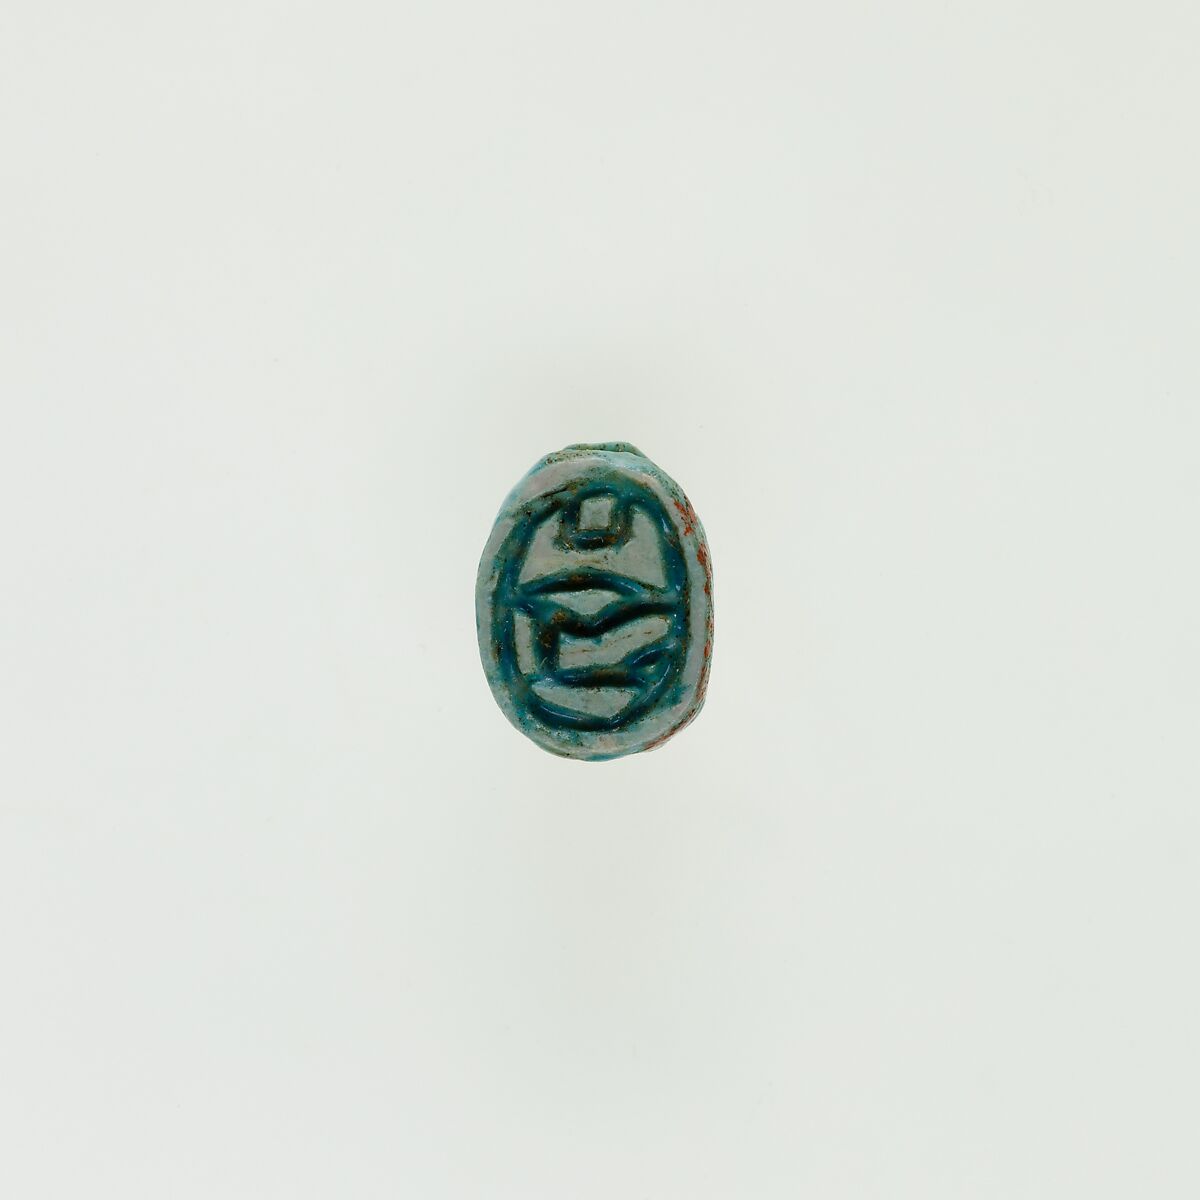 Scarab Inscribed with a Blessing Related to Re, Green glazed steatite 